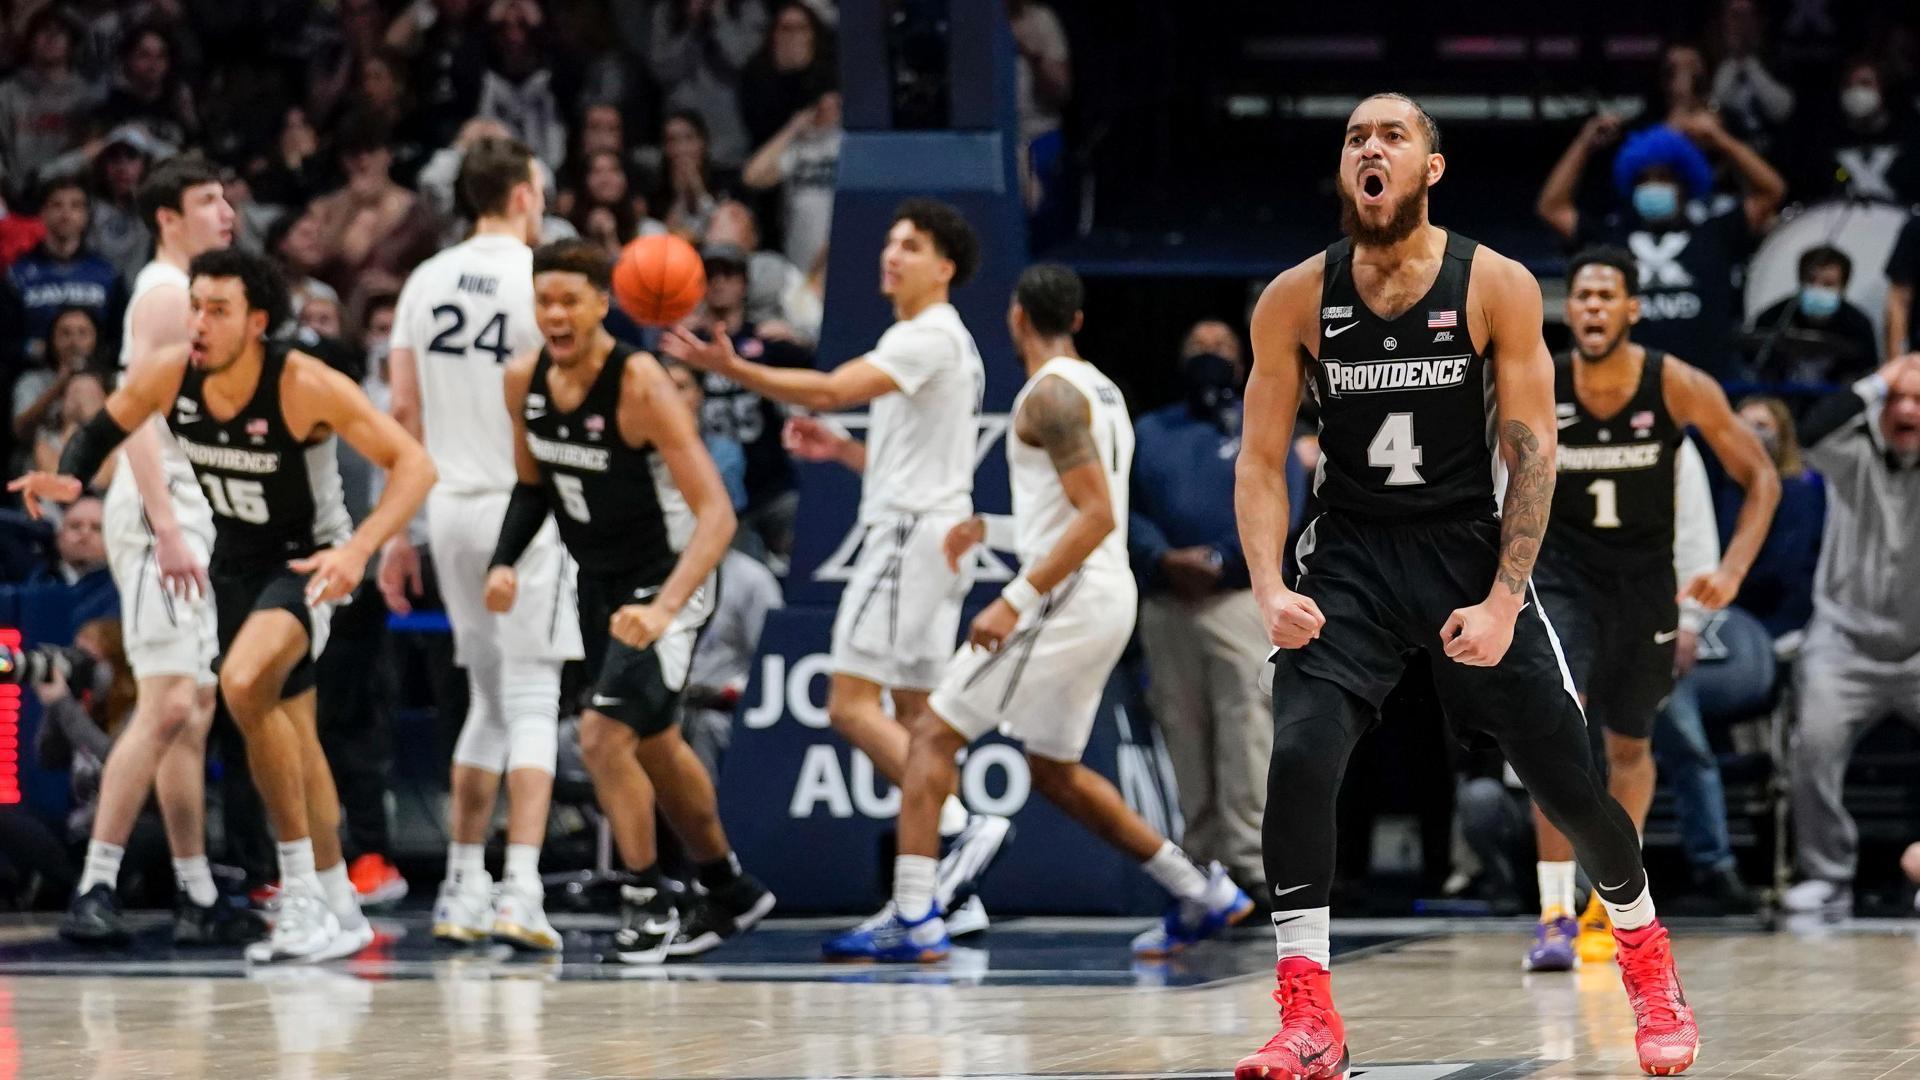 Jared Bynum plays hero with game-winner for Providence in final seconds